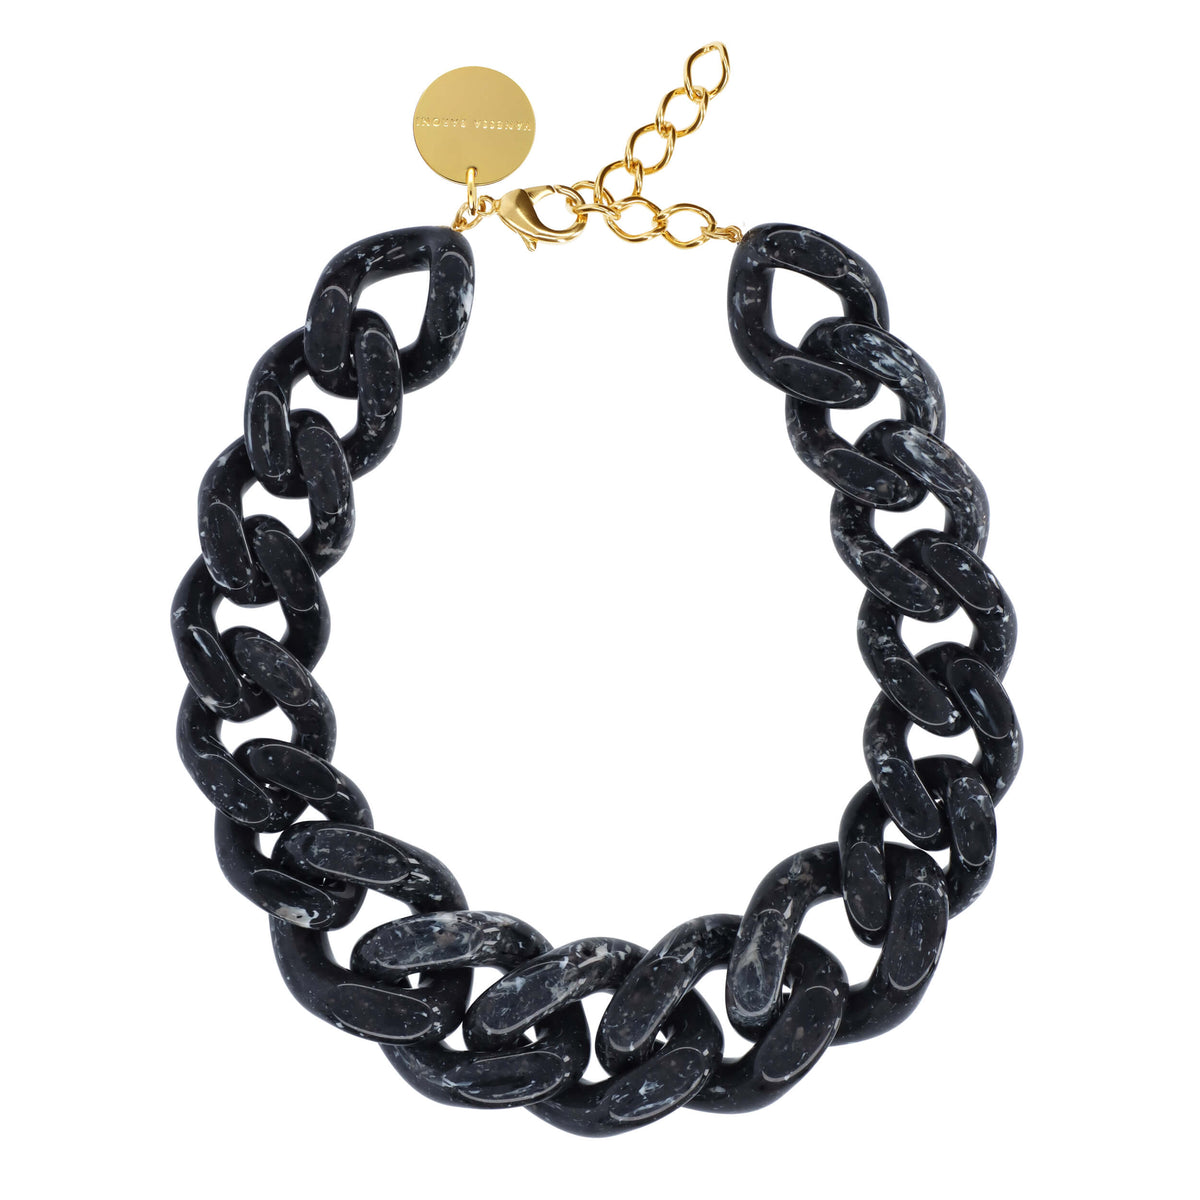 GREAT Necklace black marble